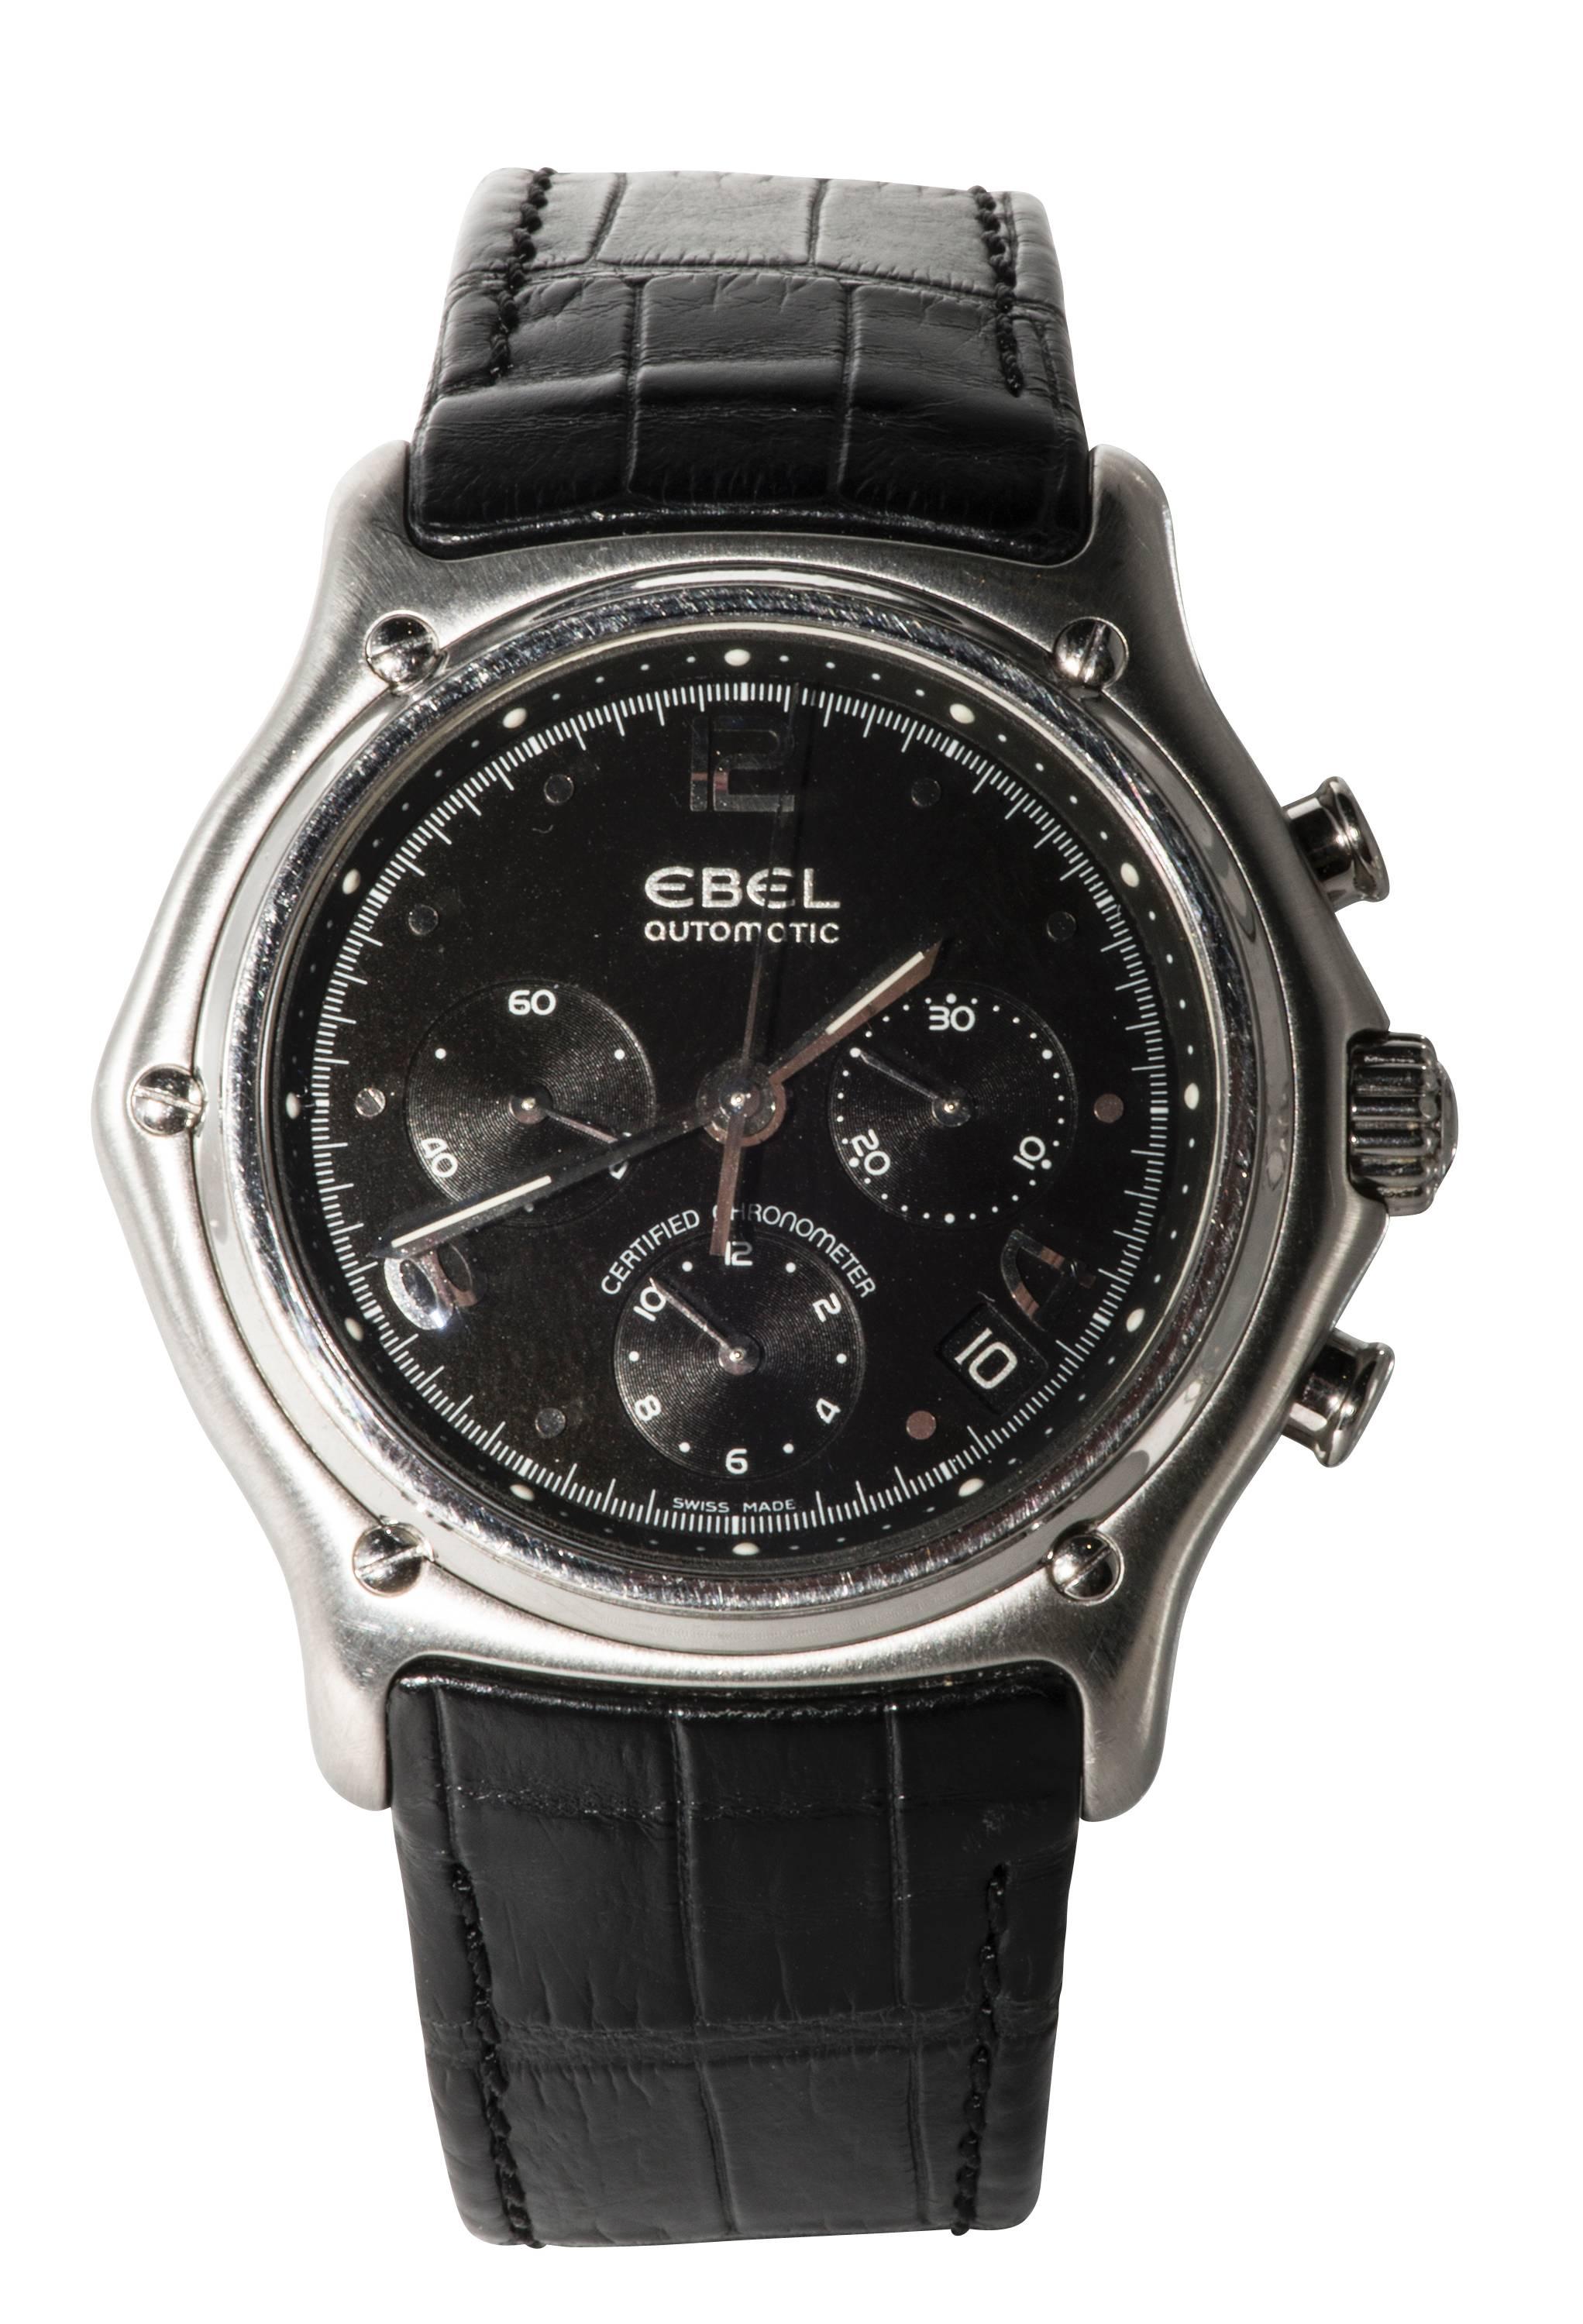 Ebel Stainless Steel Chronograph Automatic Wristwatch 2